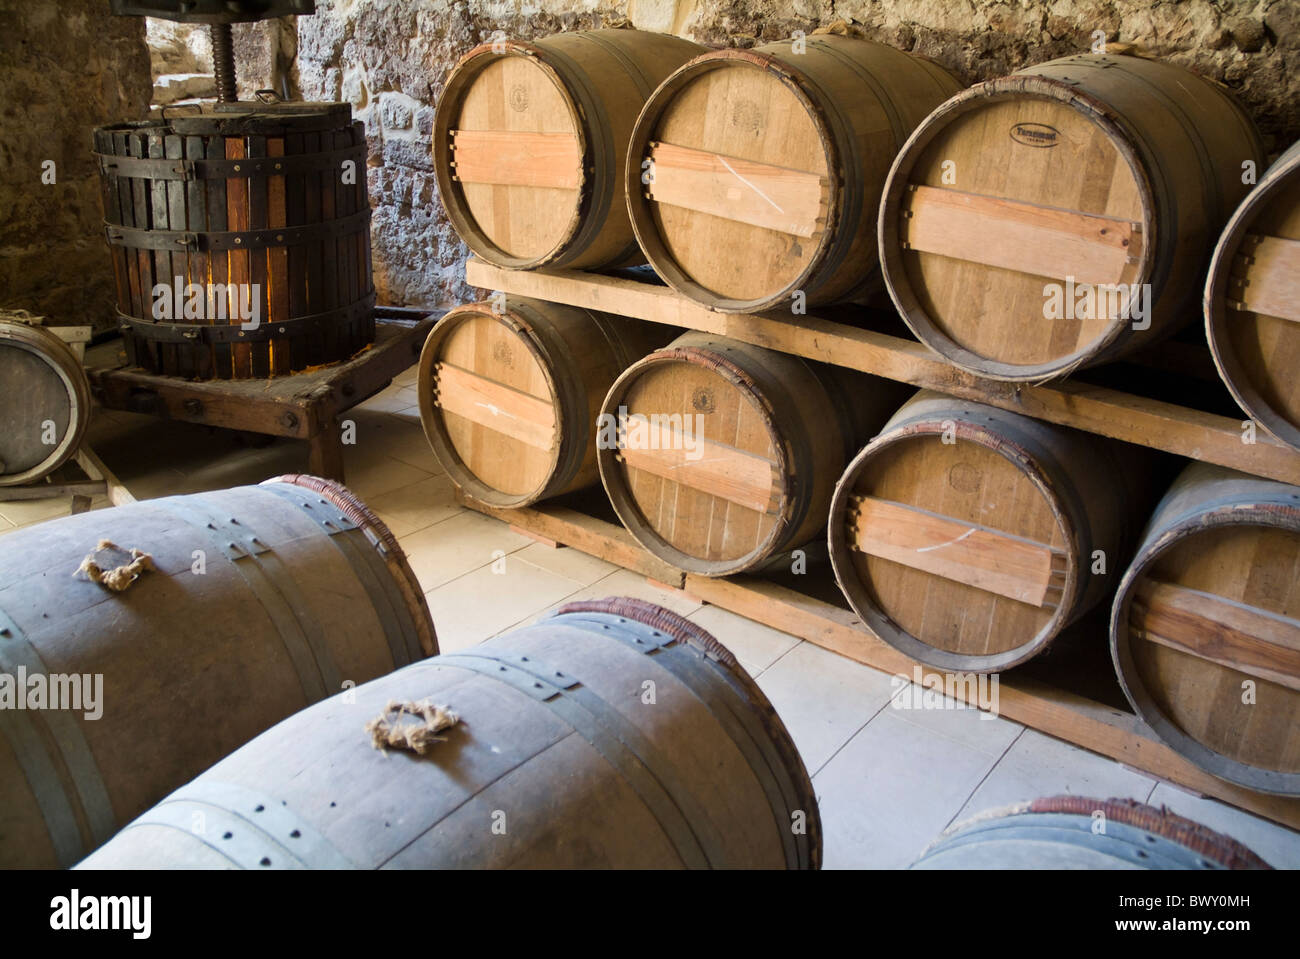 Rows of wooden wine barrels in the cellar of a winery, Cazeneuve, Gers, France. Stock Photo